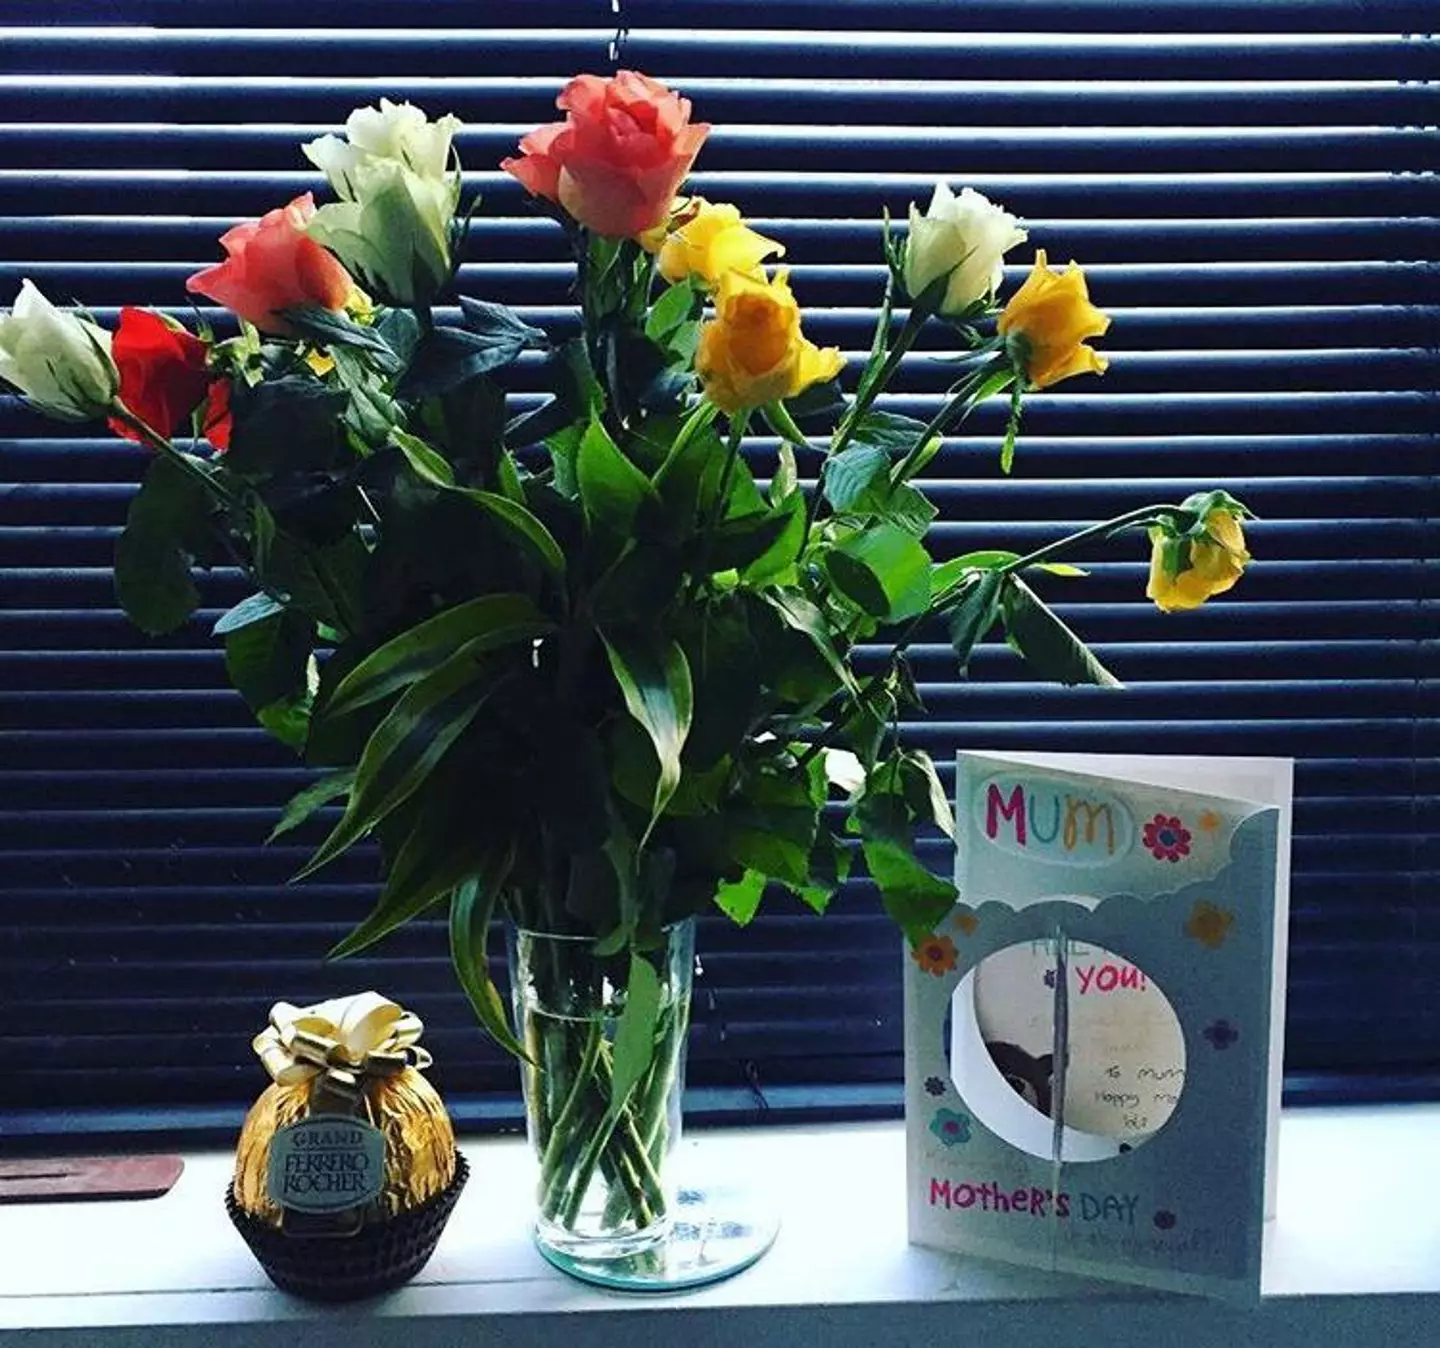 It turns out the vast majority of mums don't want flowers from their kids this Mother's Day.